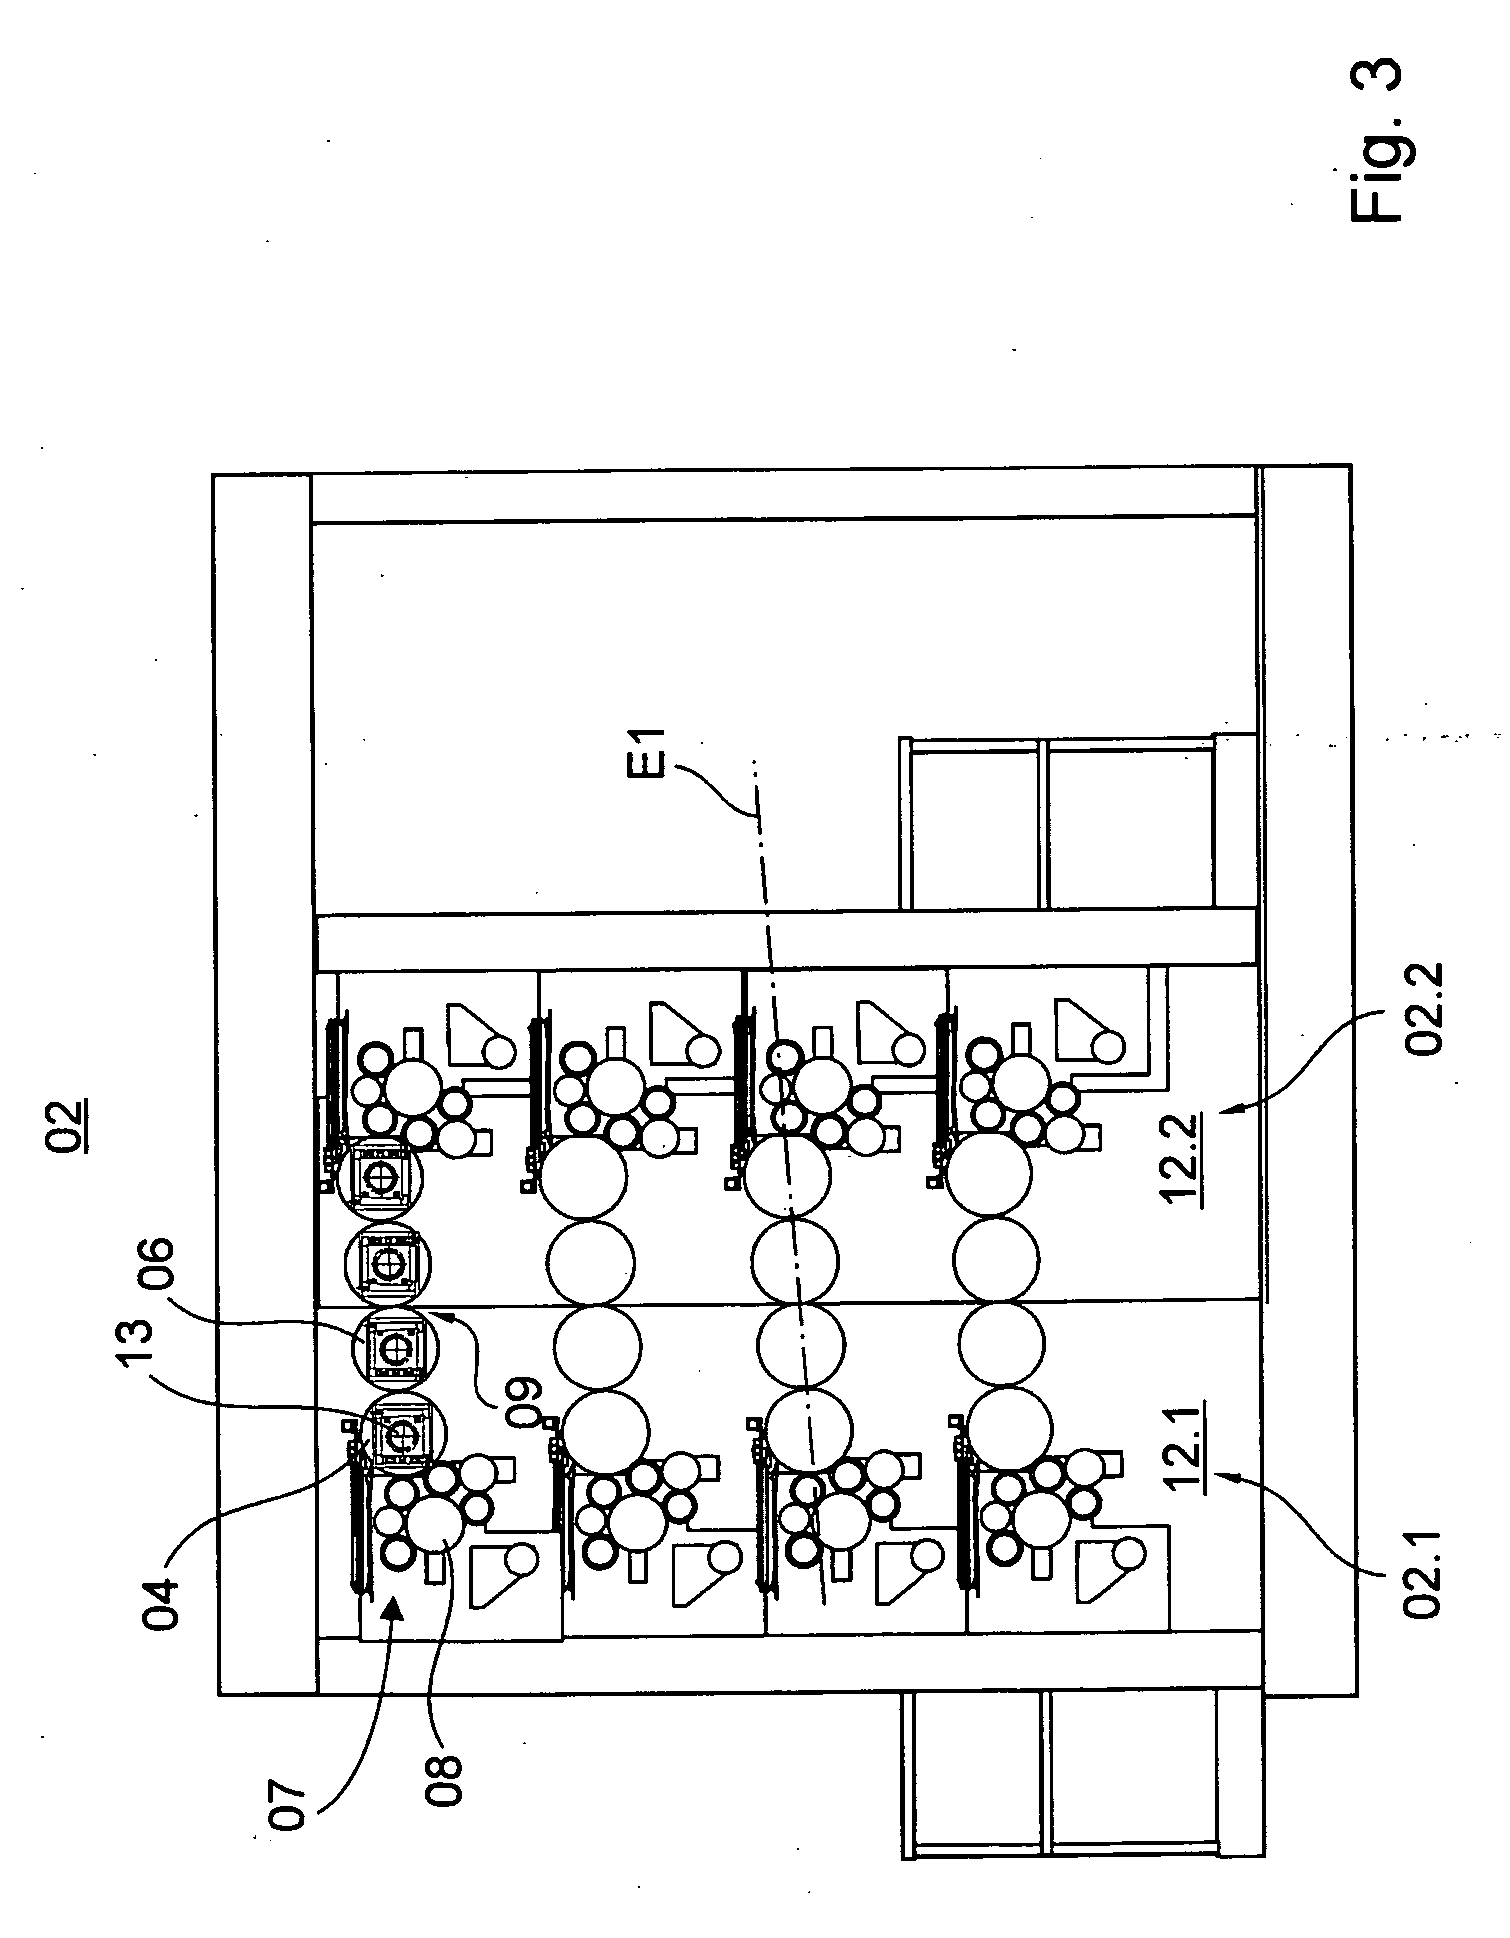 Printing press and method of operating a printing press, and printing press system and method of operating the printing press system